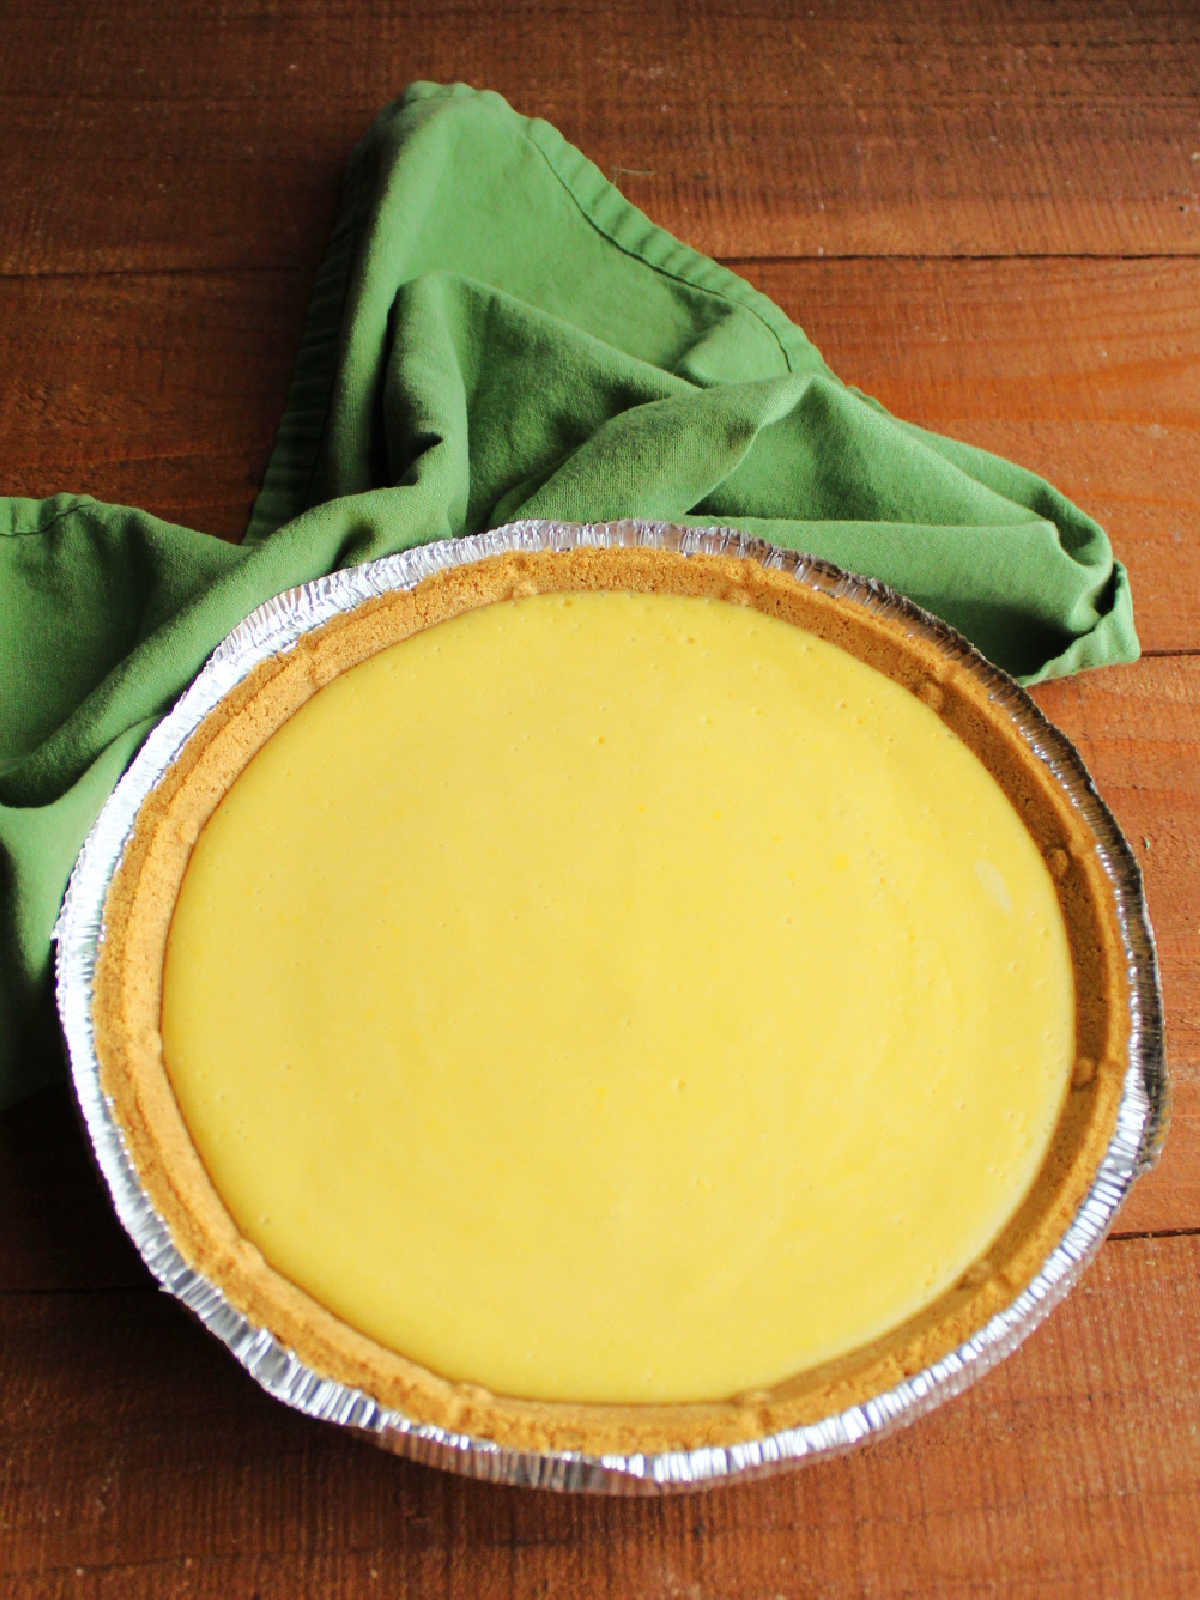 Baked condensed milk key lime pie fresh from the oven, ready to chill.